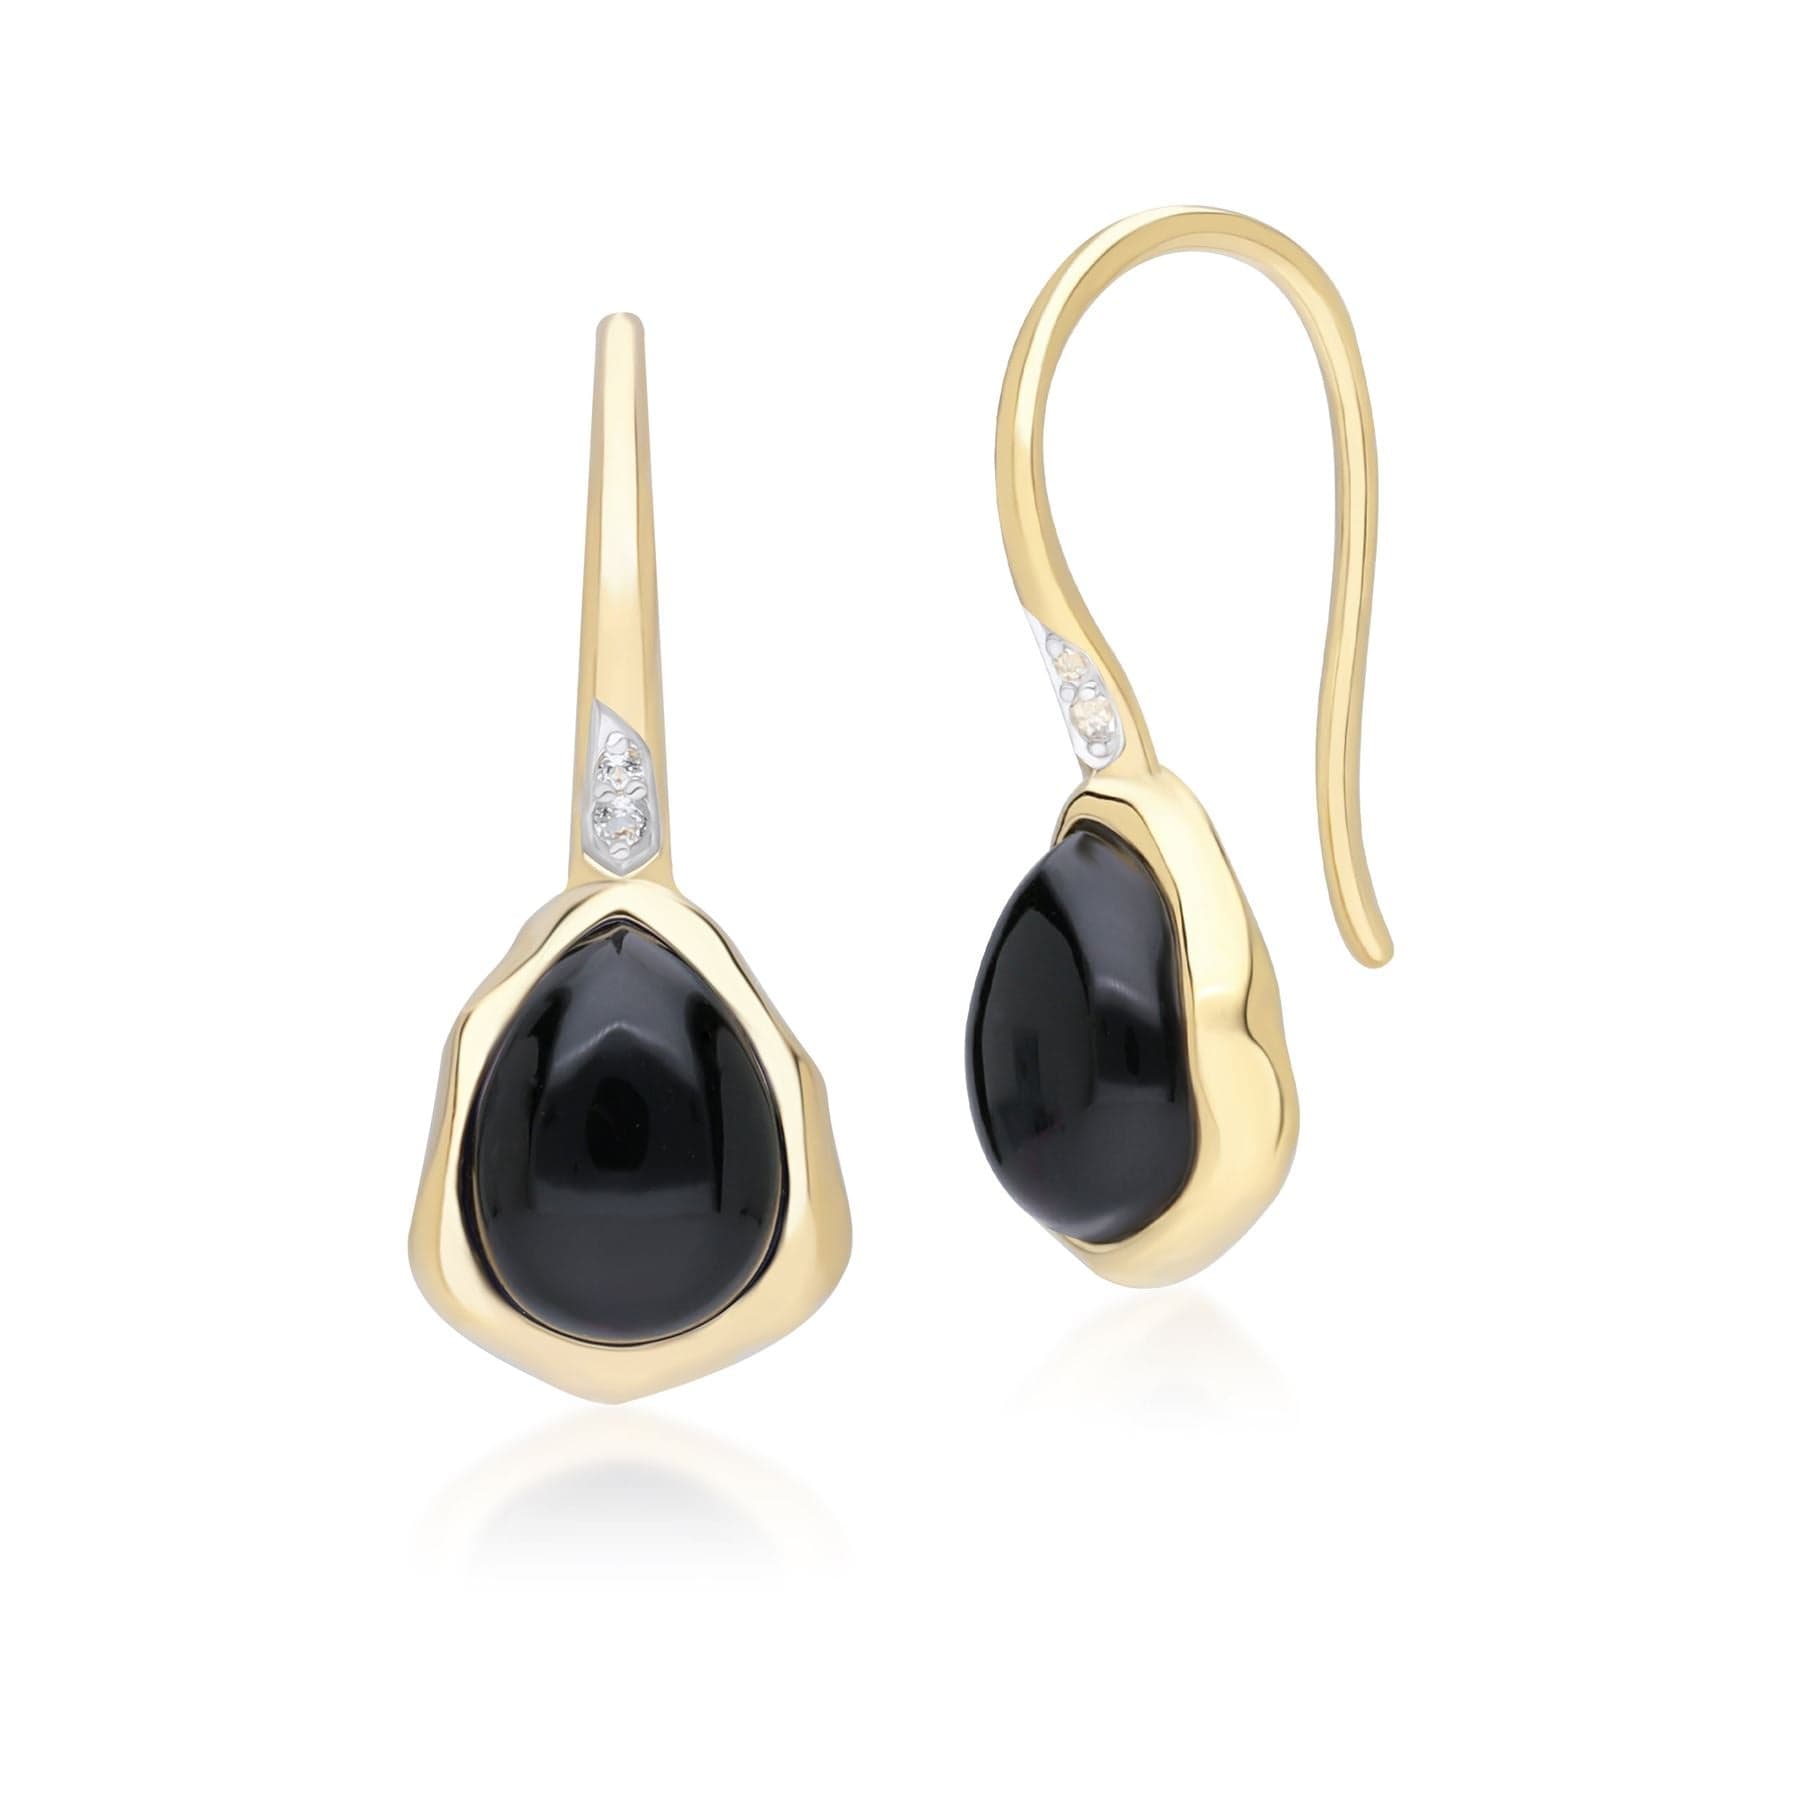 Image of Irregular Black Onyx & Topaz Drop Earrings In 18ct Gold Plated SterlIng Silver